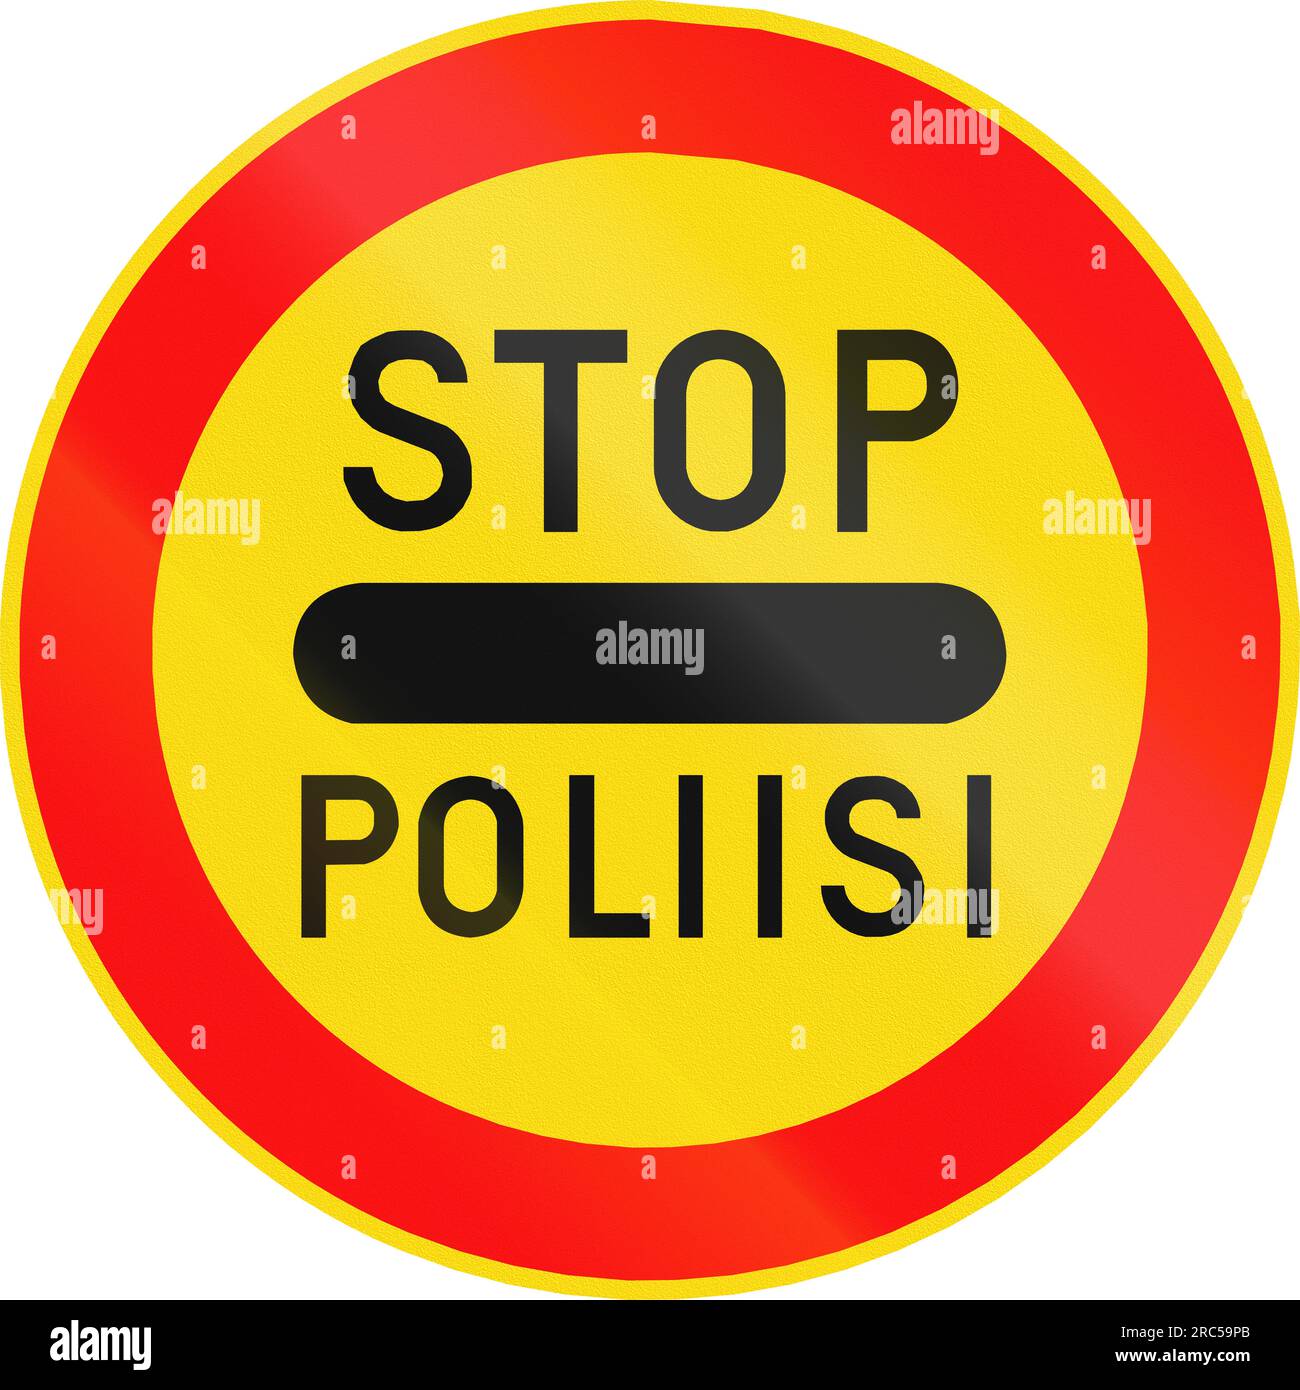 Road sign 392 in Finland - Police checkpoint ahead, passing without stopping first prohibited. The words mean stop - police. Stock Photo